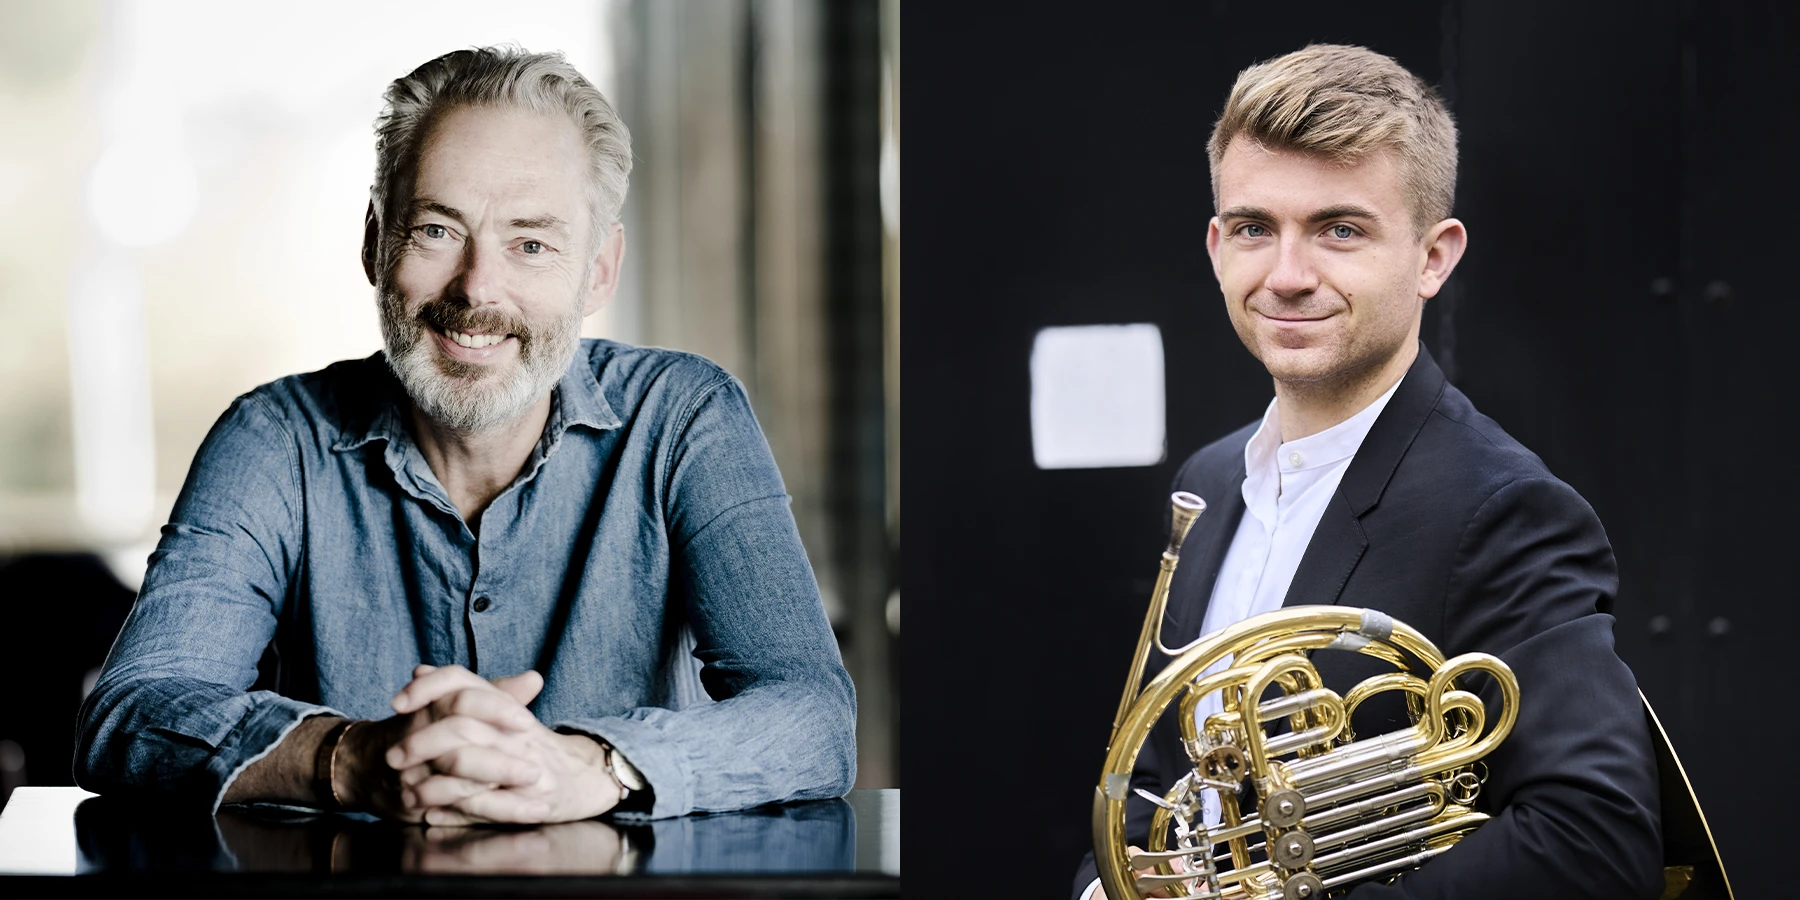 Ben Goldscheider, Mark Padmore and London Mozart Players perform Holst, Delius & Elgar and world premieres by John Frederick Hudson and Jago Thornton at JAM on the Marsh.